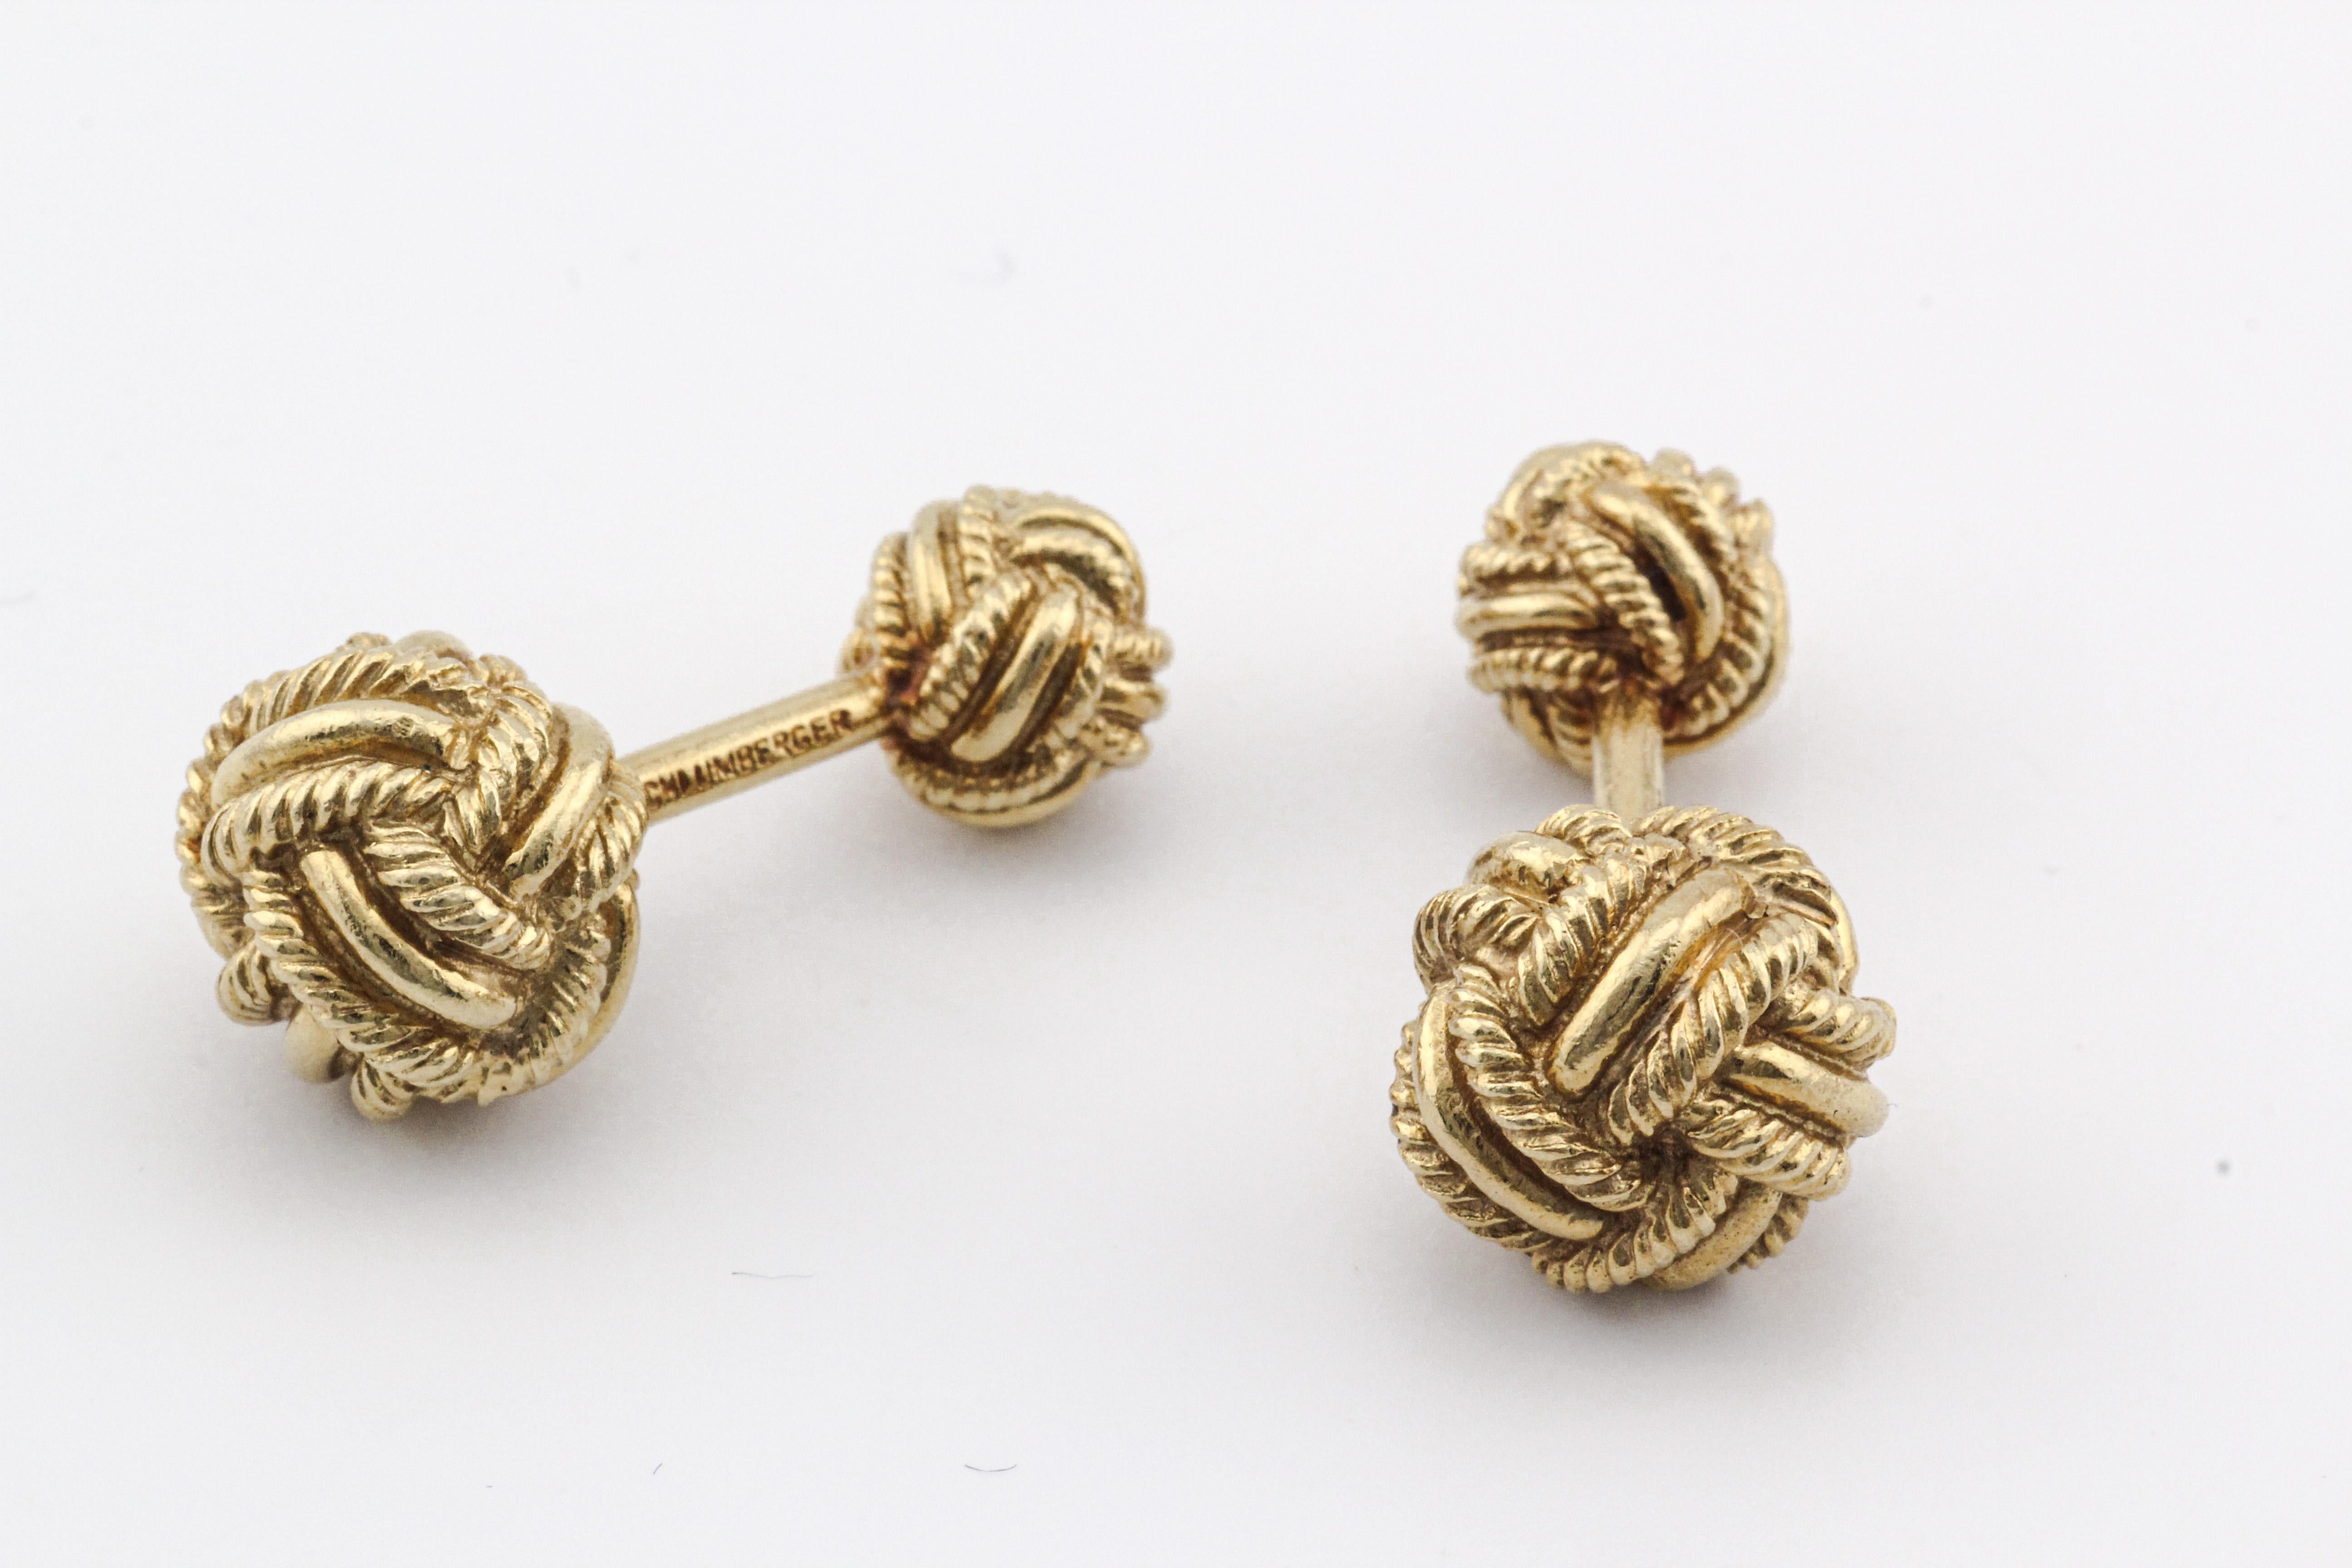 Introducing the Tiffany & Co. Schlumberger 18K Yellow Gold Rope Knot Cufflinks and Studs Set—an exquisite ensemble that encapsulates the essence of timeless elegance and Schlumberger's iconic design aesthetic. Crafted with meticulous precision, this